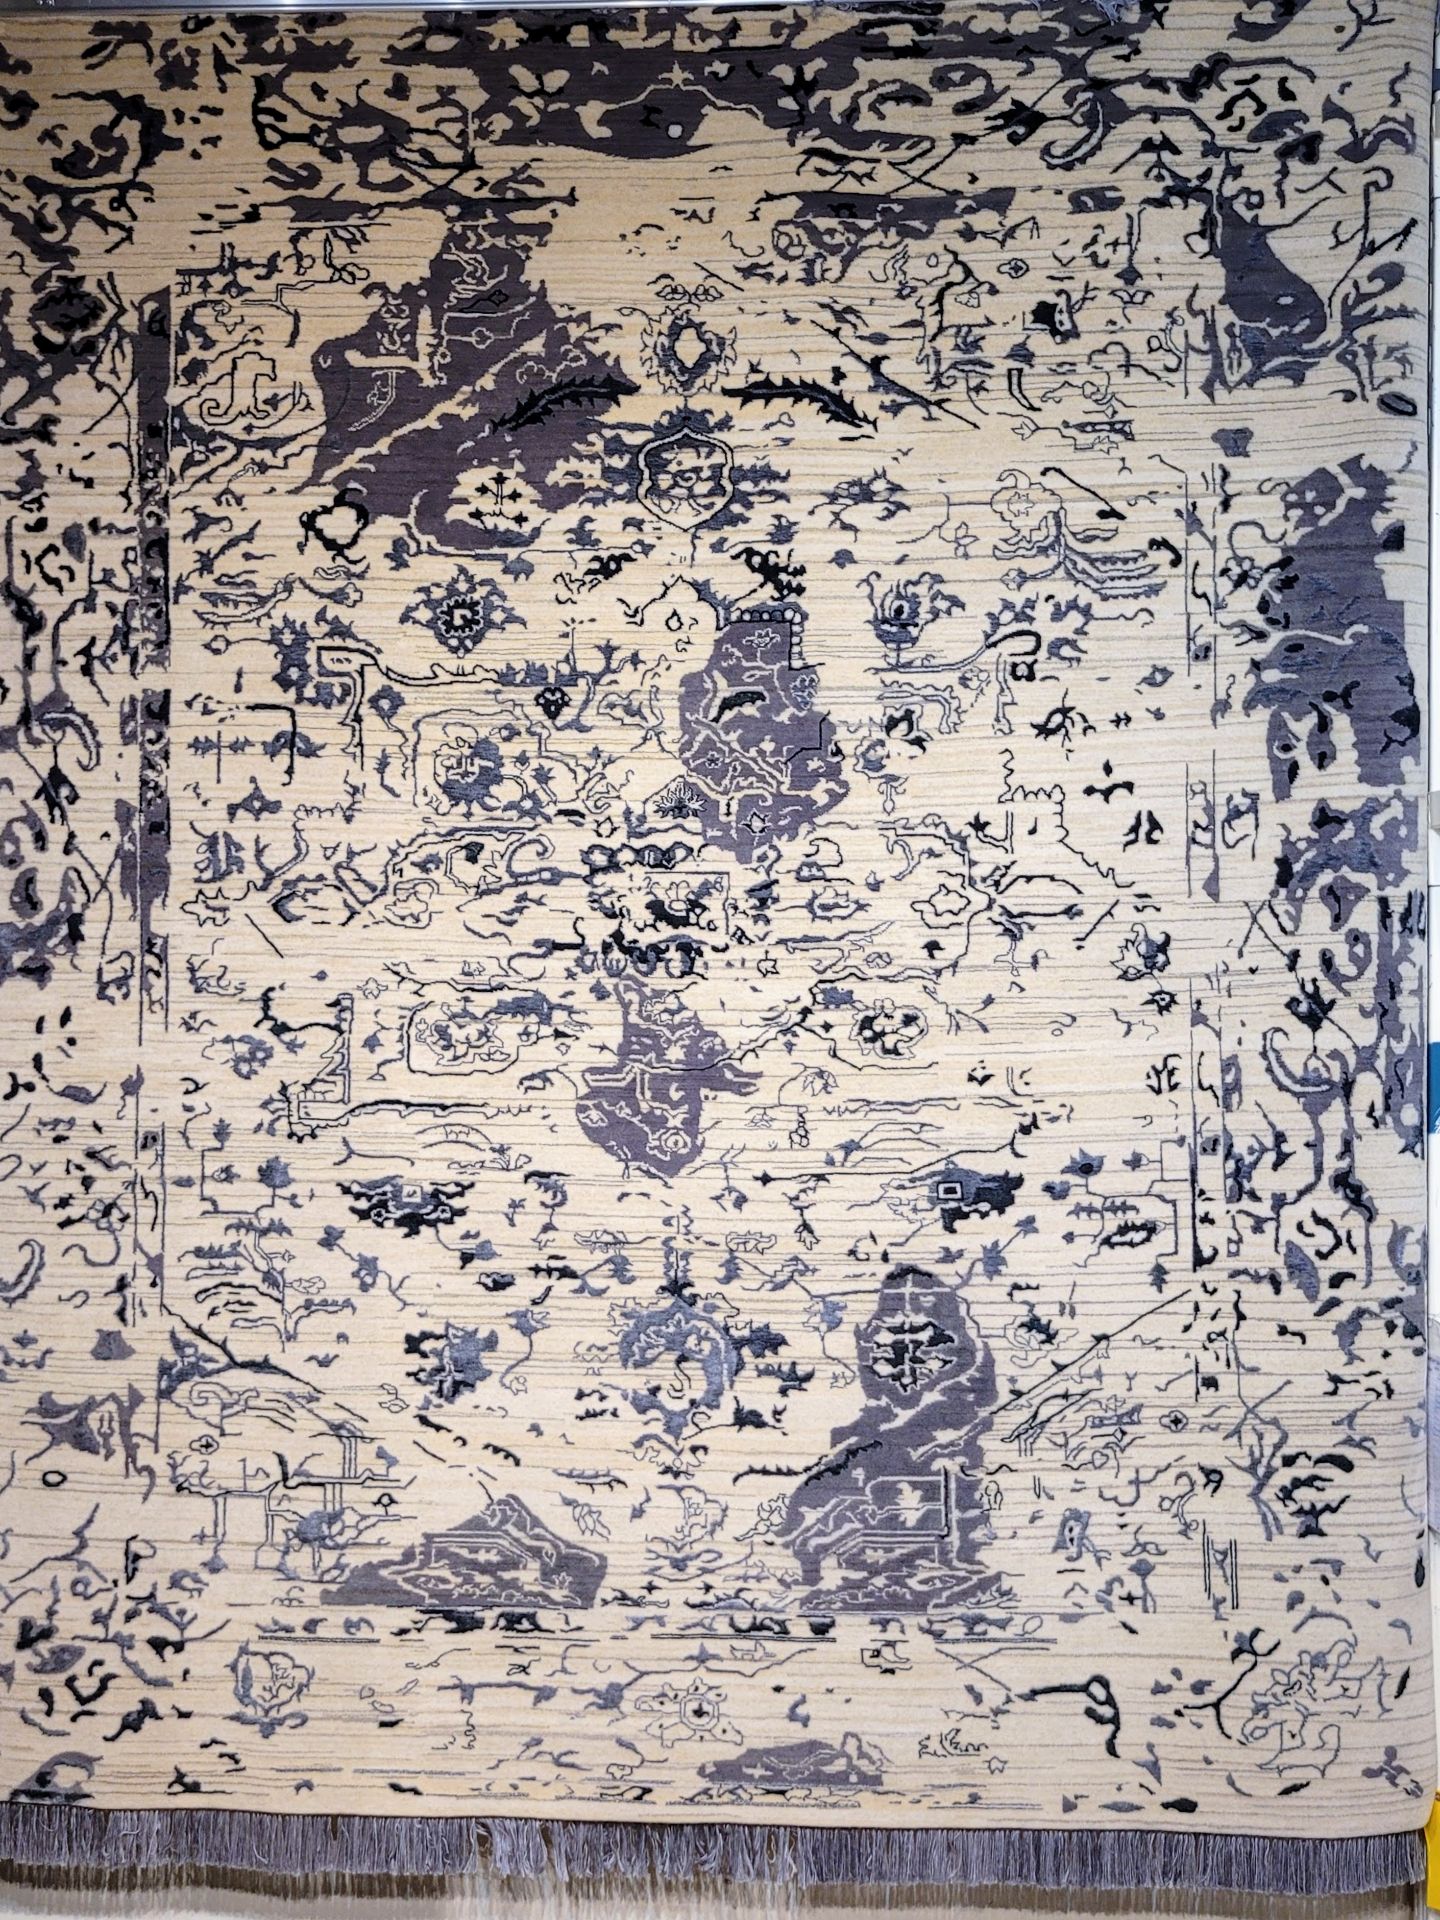 APPROX 8.1' x 9.8' - BEIGE/GRAY - WOOL HAND KNOTTED IN INDIA - MSRP $9,282.00 (LOCATED IN GALLERY